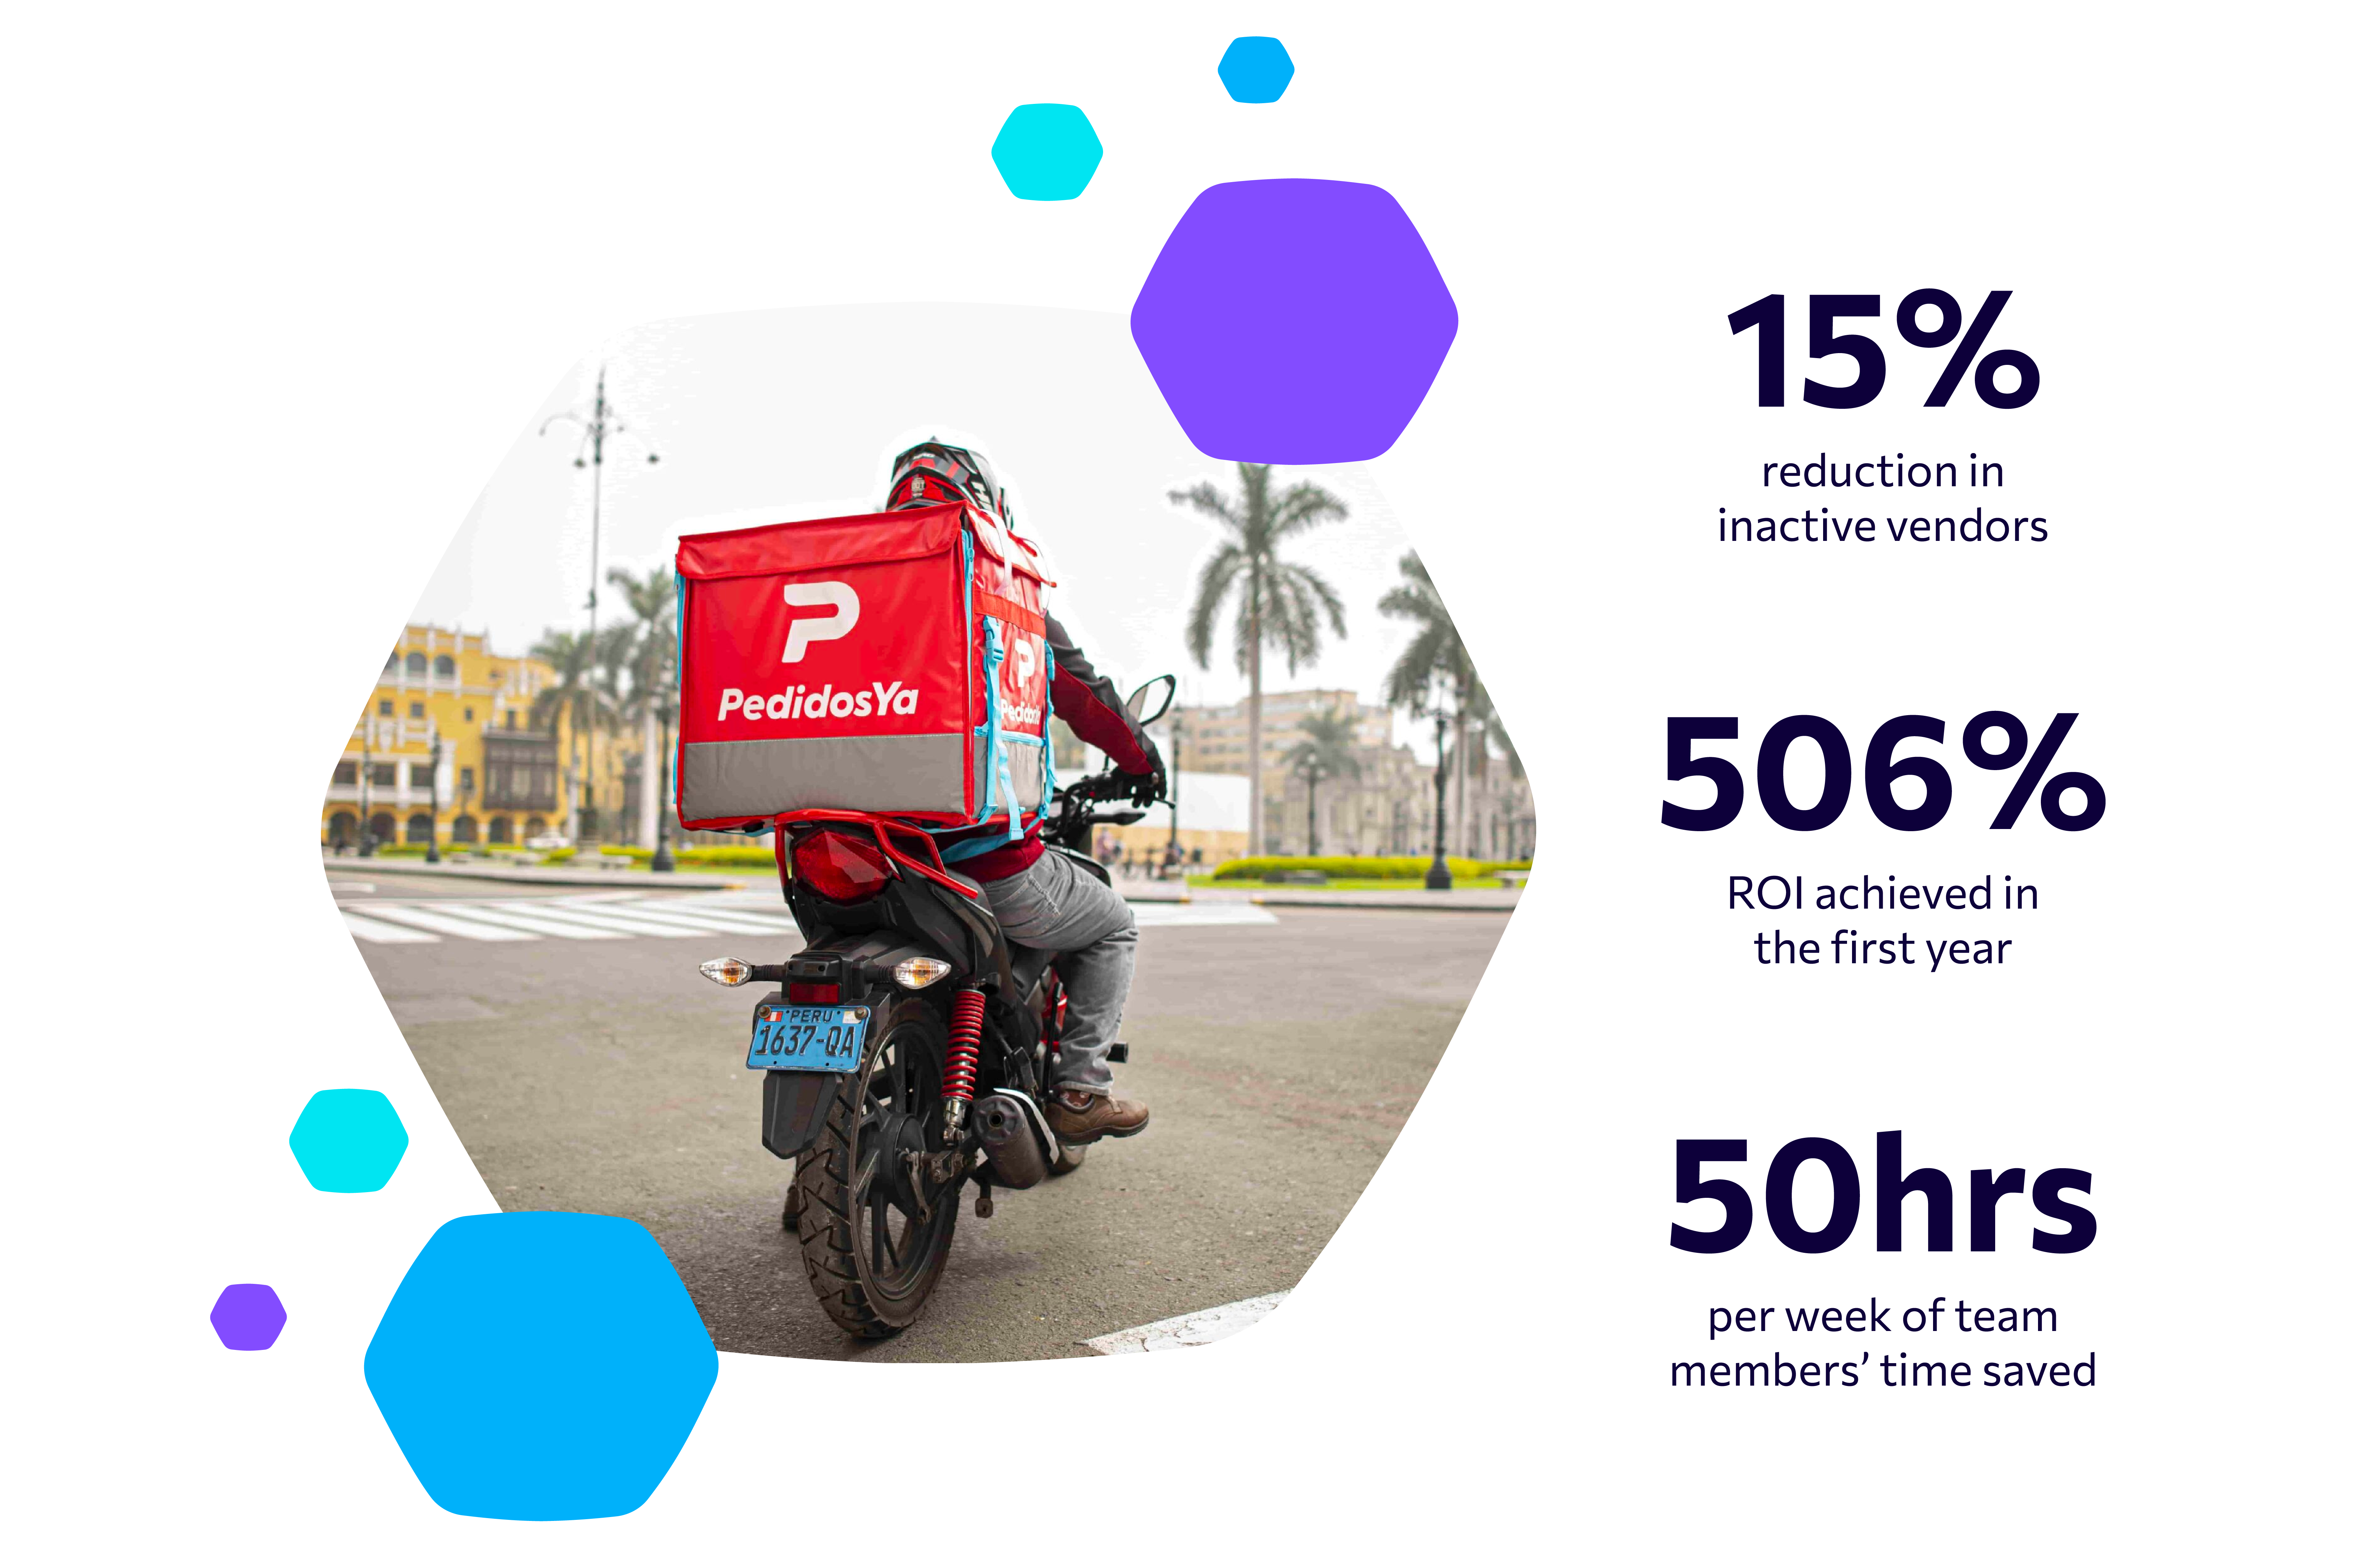 PedidosYa saw a 15% reduction in inactive vendors, saved 50 hours per week of their team members' time, and achieved a 501% ROI in the first year